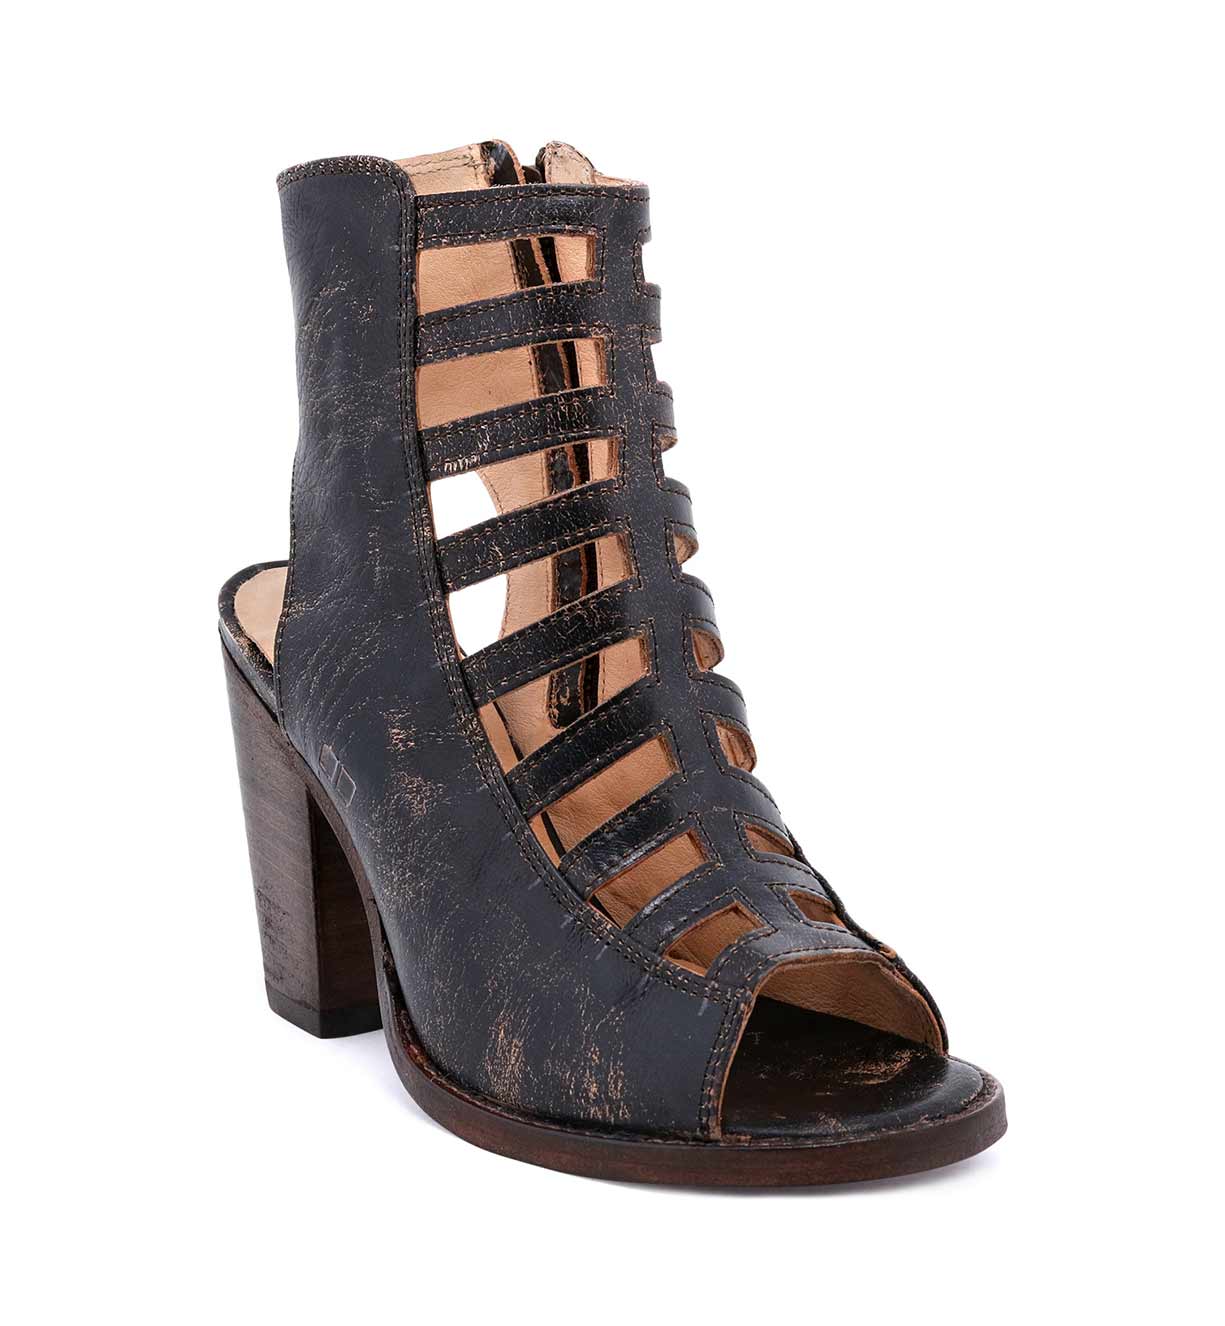 A women's black high heeled sandal with a wooden heel, the Occam by Bed Stu.